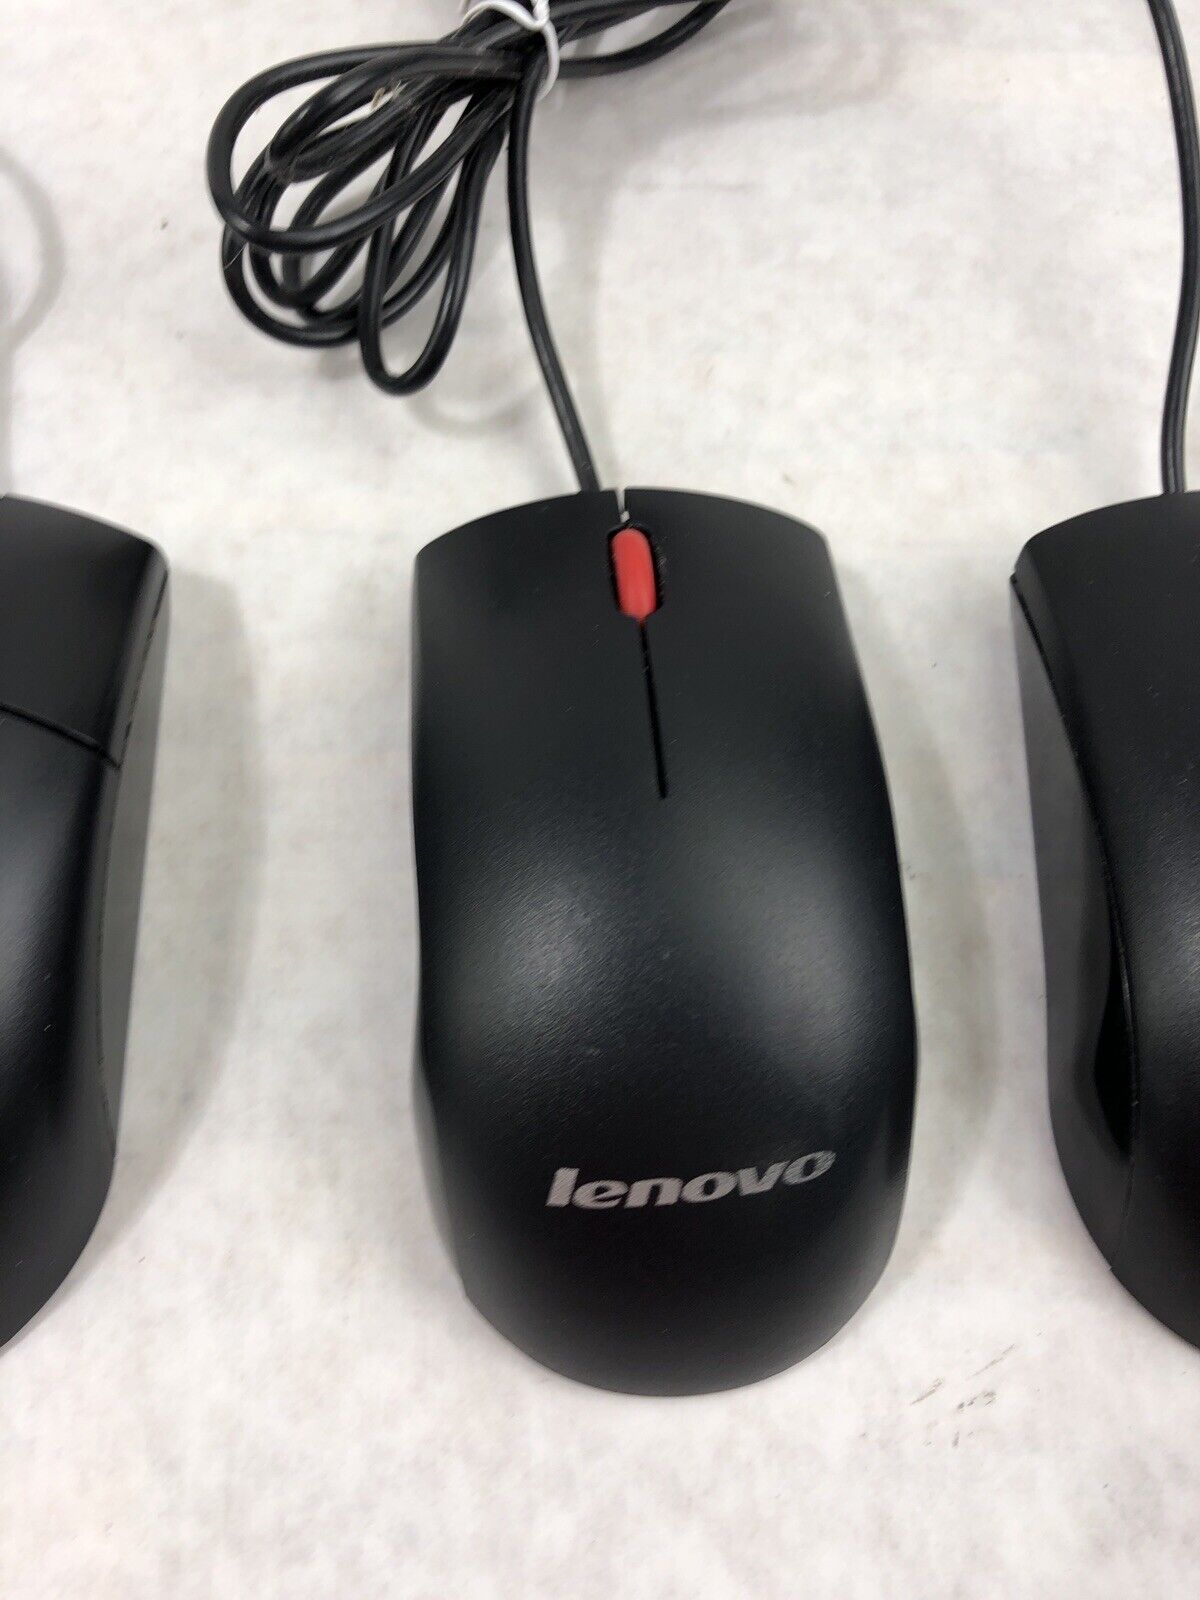 Lot of 4 Assorted Lenovo Wired USB Mice - 2 45J4889 - 1 0PH133 - 1 03X6861